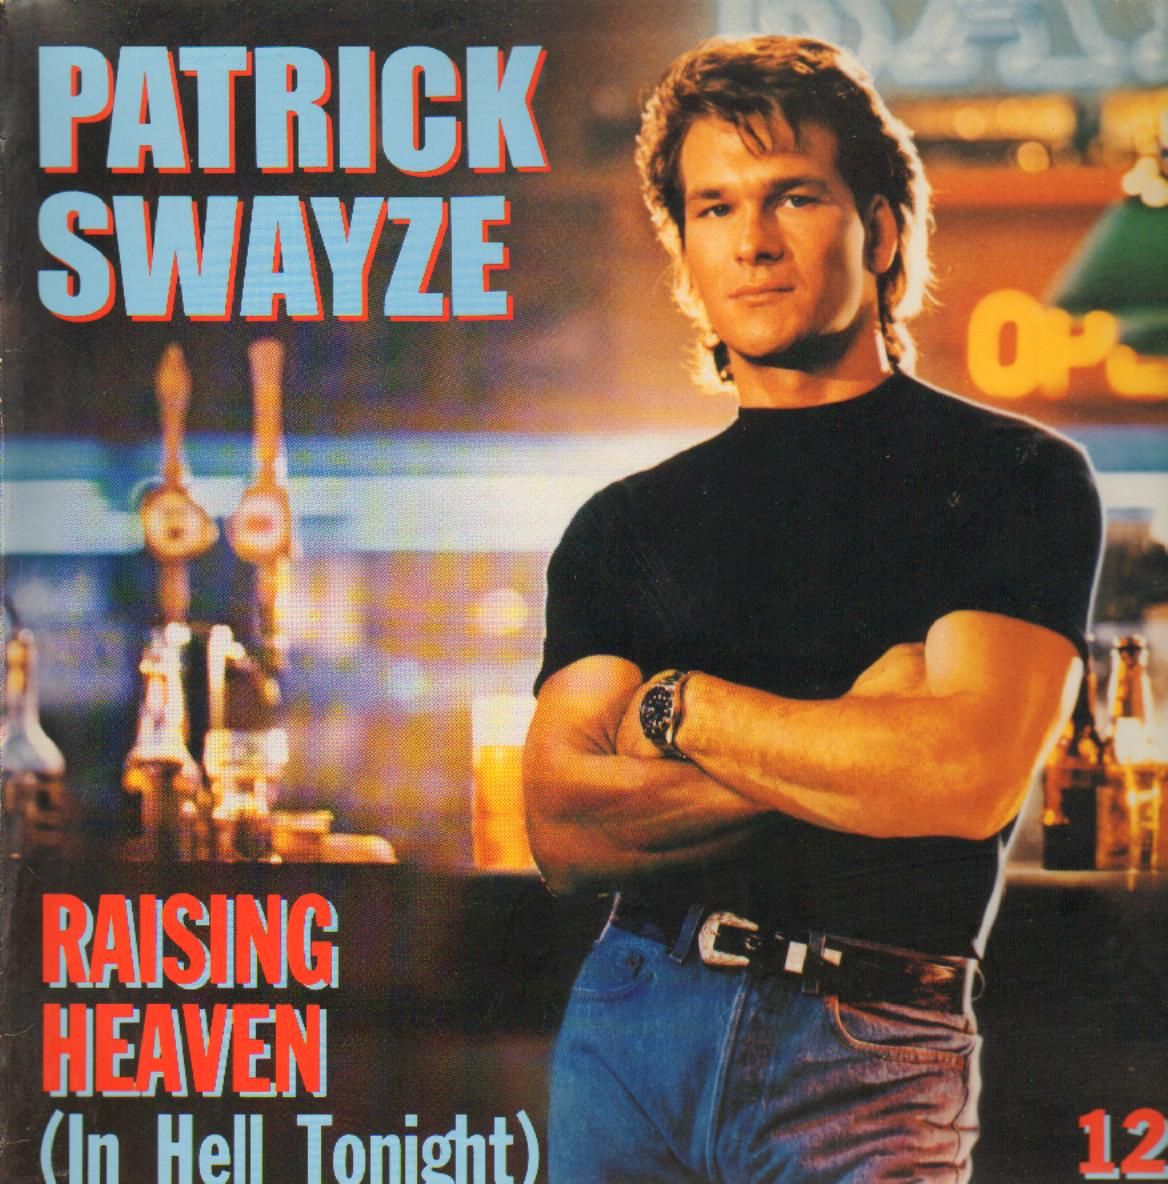 Quotes From Patrick Swayze Roadhouse QuotesGram.